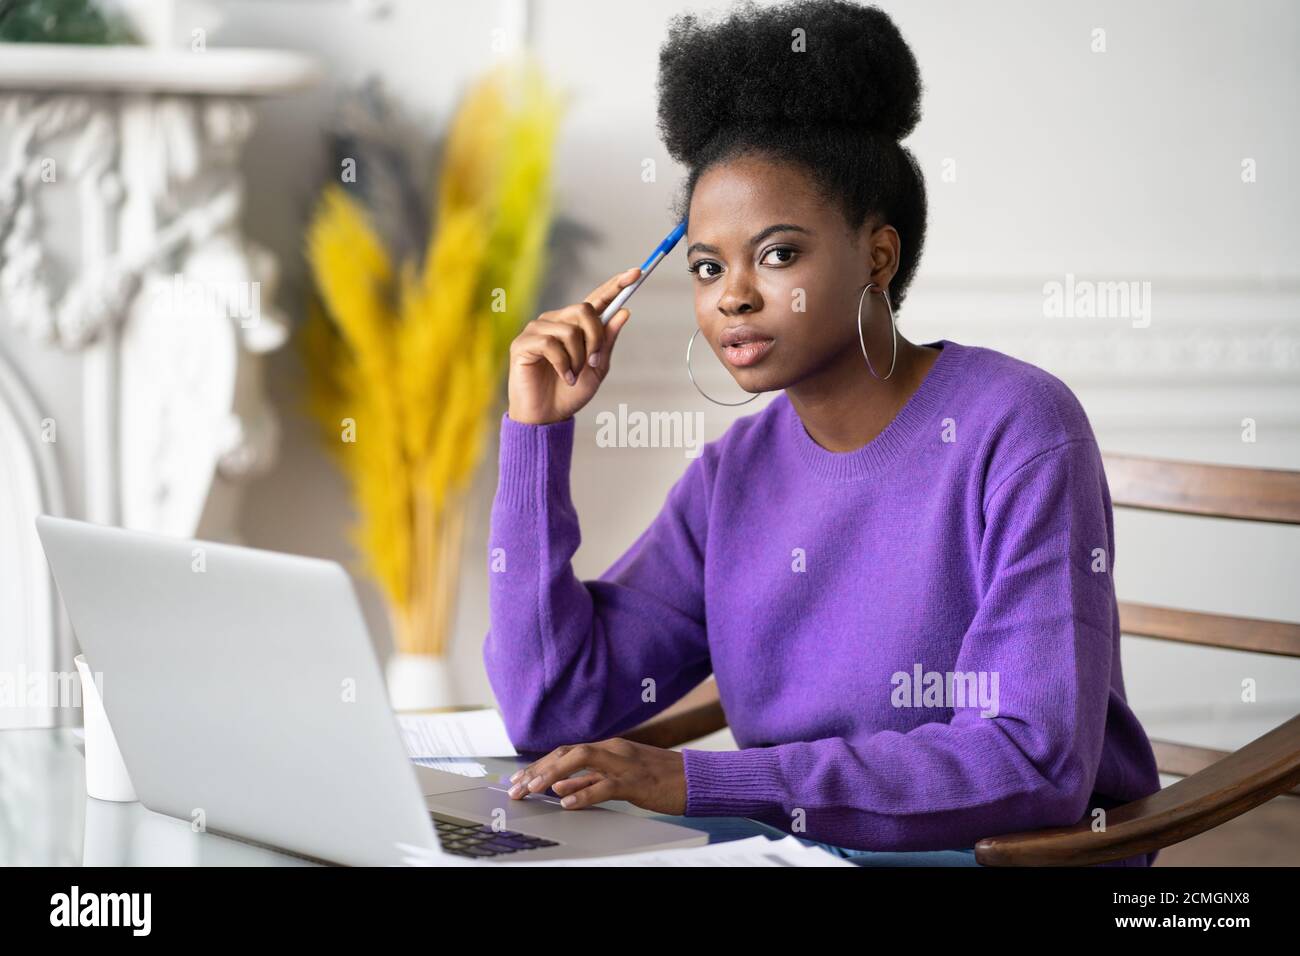 Portrait of Afro-American millennial student woman with afro hairstyle looking at camera while making researches browsing information on laptop, prepa Stock Photo